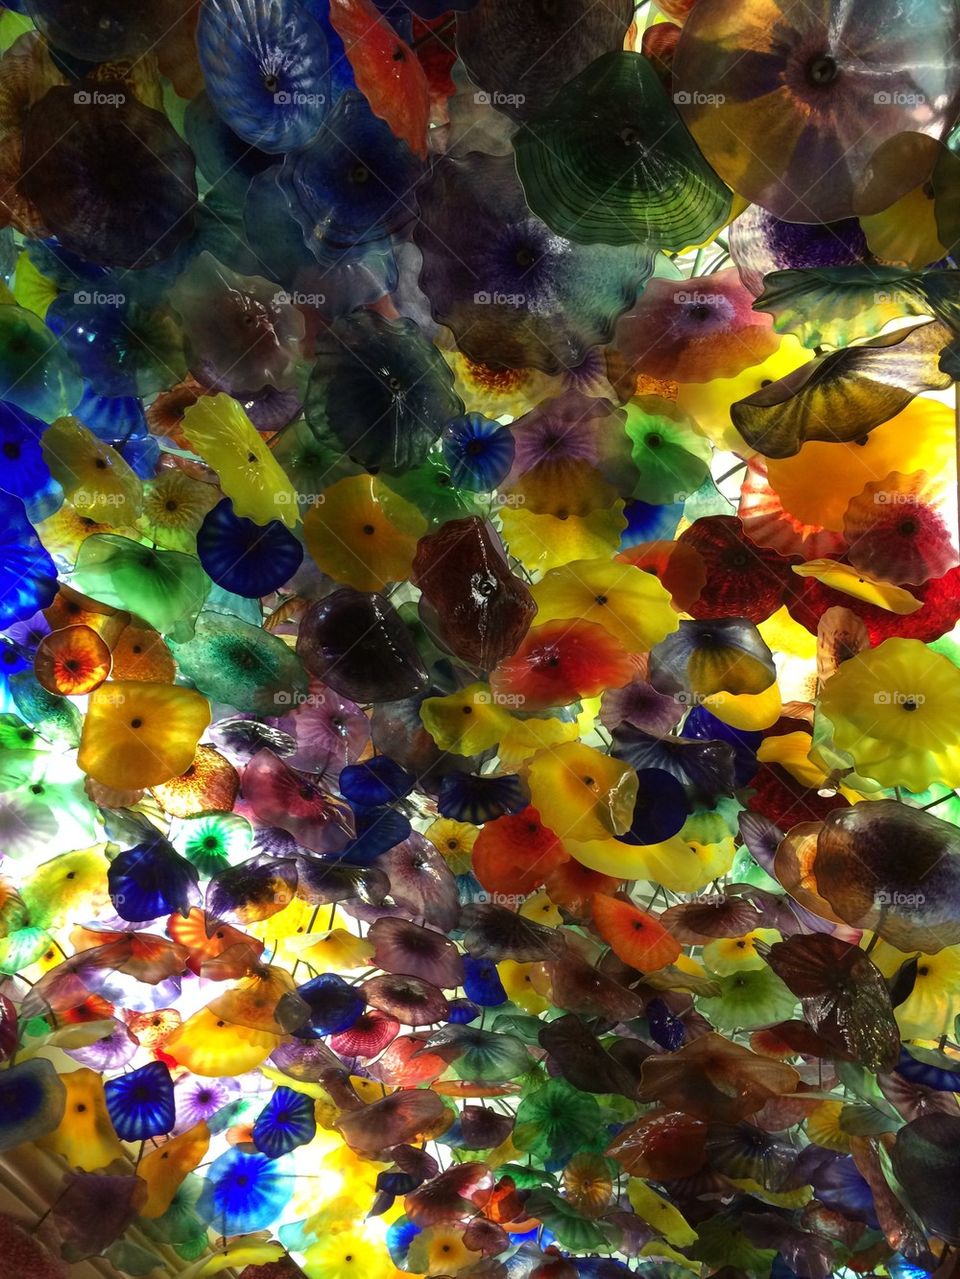 Stained glass ceiling at Bellagio 